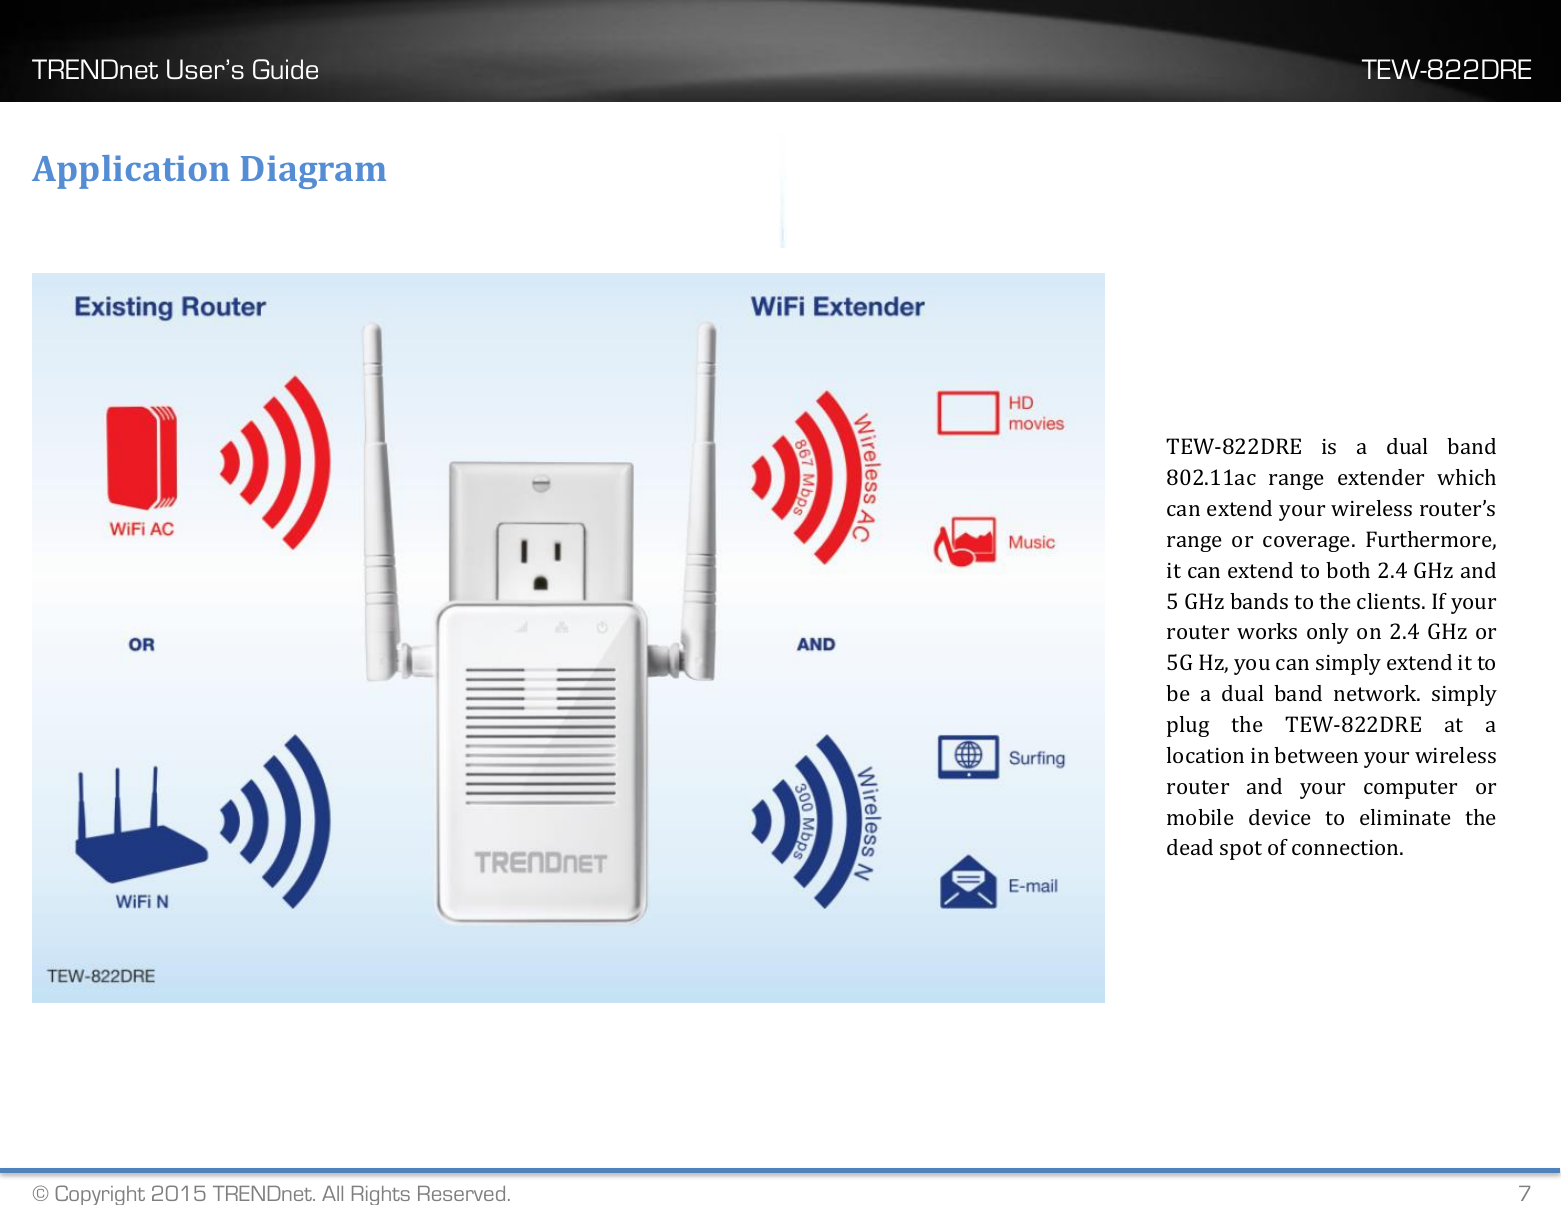 TRENDnet User’s Guide    TEW-822DRE © Copyright 2015 TRENDnet. All Rights Reserved.   7 Application Diagram     TEW-822DRE  is  a  dual  band 802.11ac  range  extender  which can extend your wireless router’s range  or  coverage.  Furthermore, it can extend to both 2.4 GHz and 5 GHz bands to the clients. If your router works only on 2.4 GHz or 5G Hz, you can simply extend it to be  a  dual  band  network.  simply plug  the  TEW-822DRE  at  a location in between your wireless router  and  your  computer  or mobile  device  to  eliminate  the dead spot of connection. 